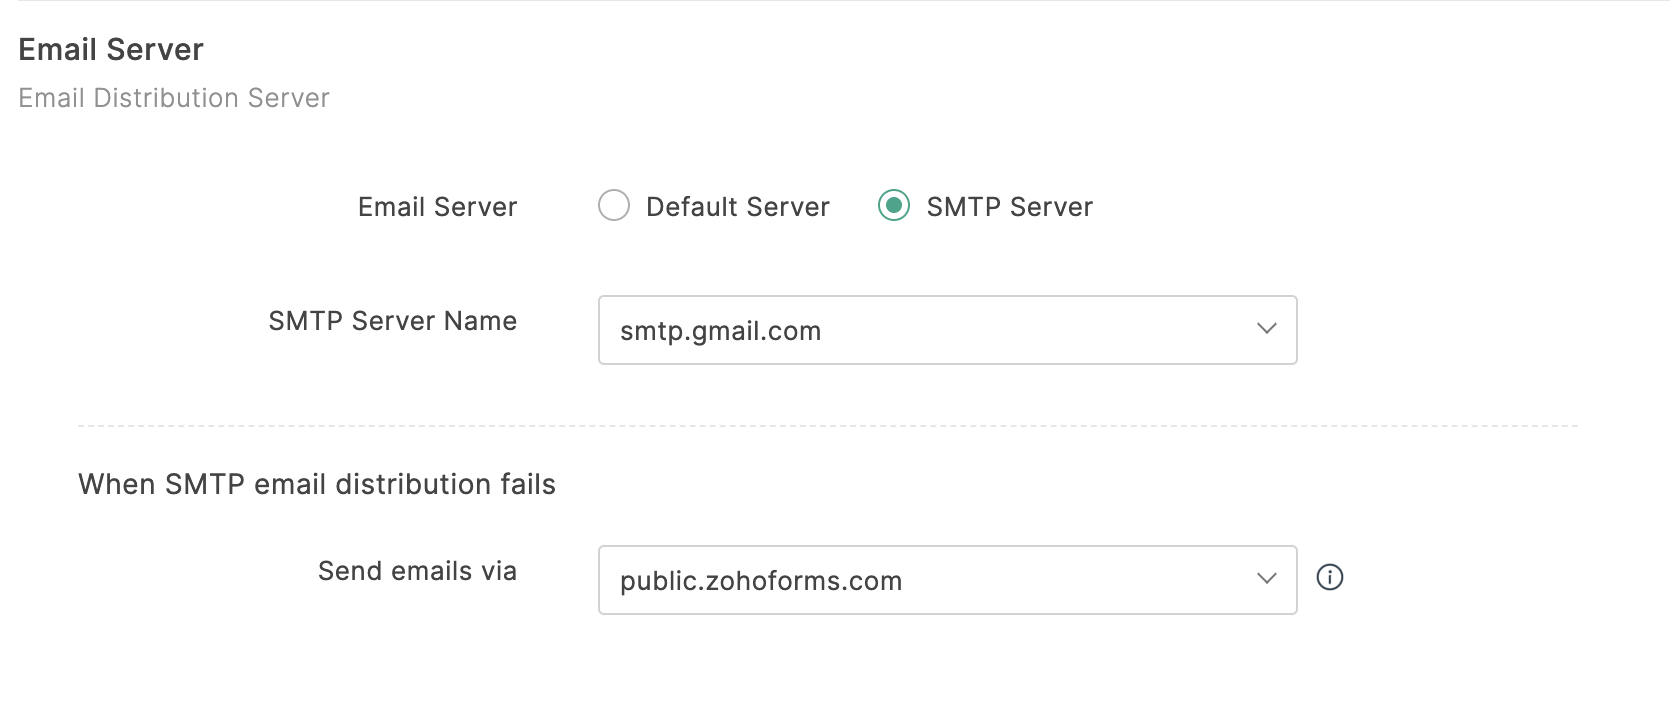 Using SMTP server in a form